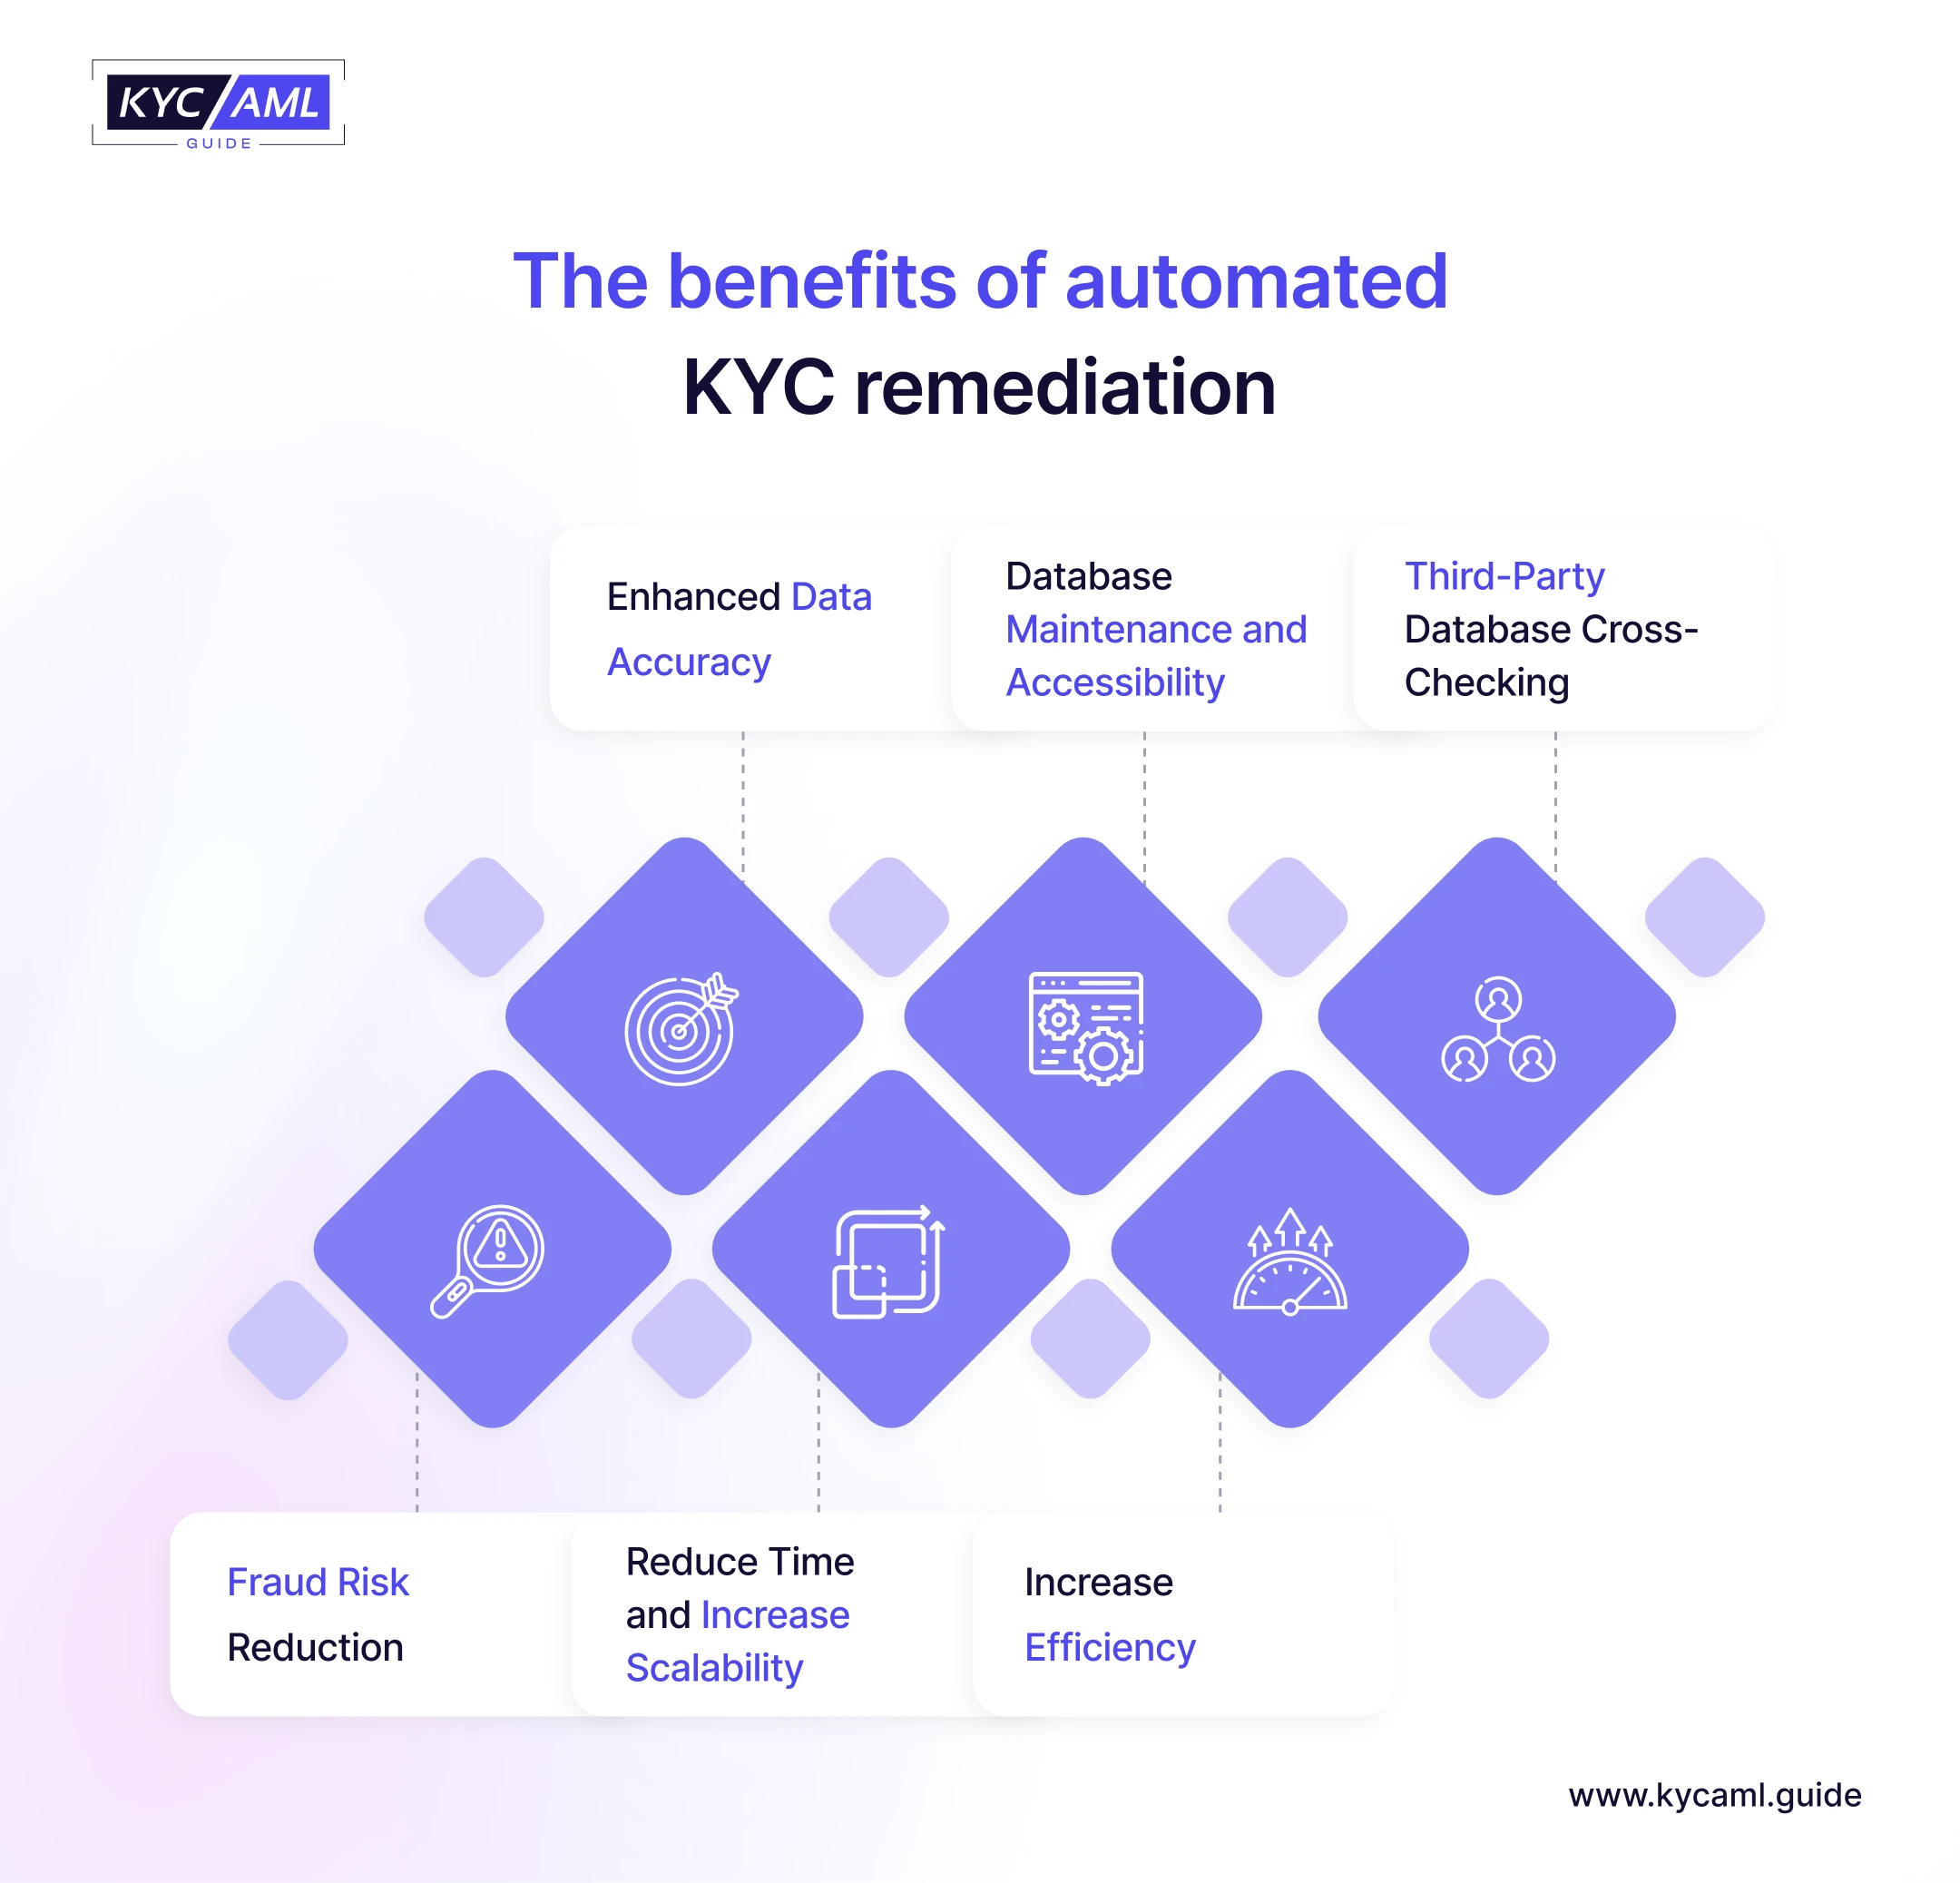 The benefits of automated KYC remediation